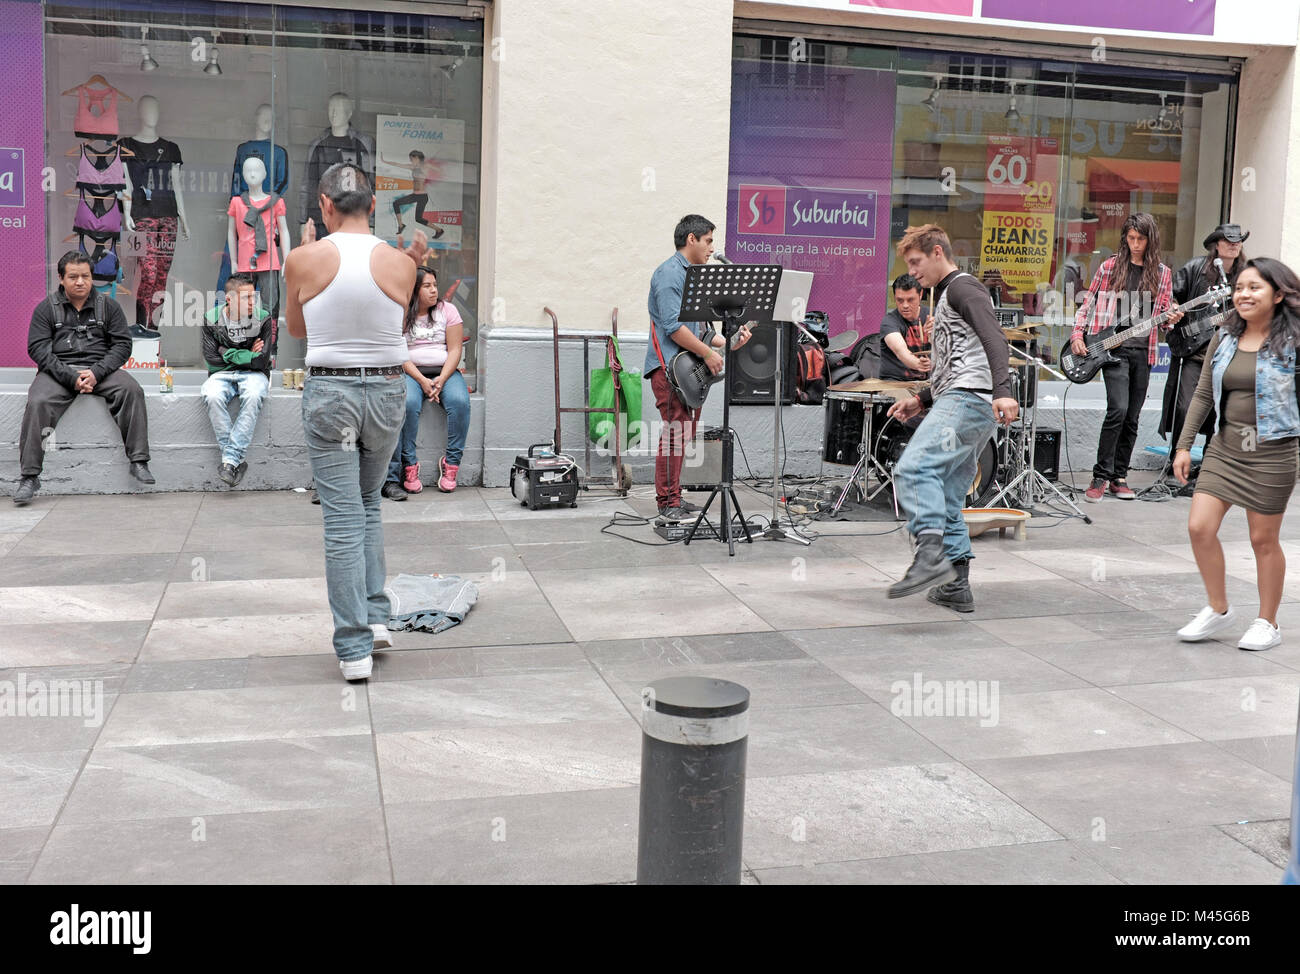 Street musicians entertain on a sidewalk in the Centro Historico district in Mexico City, Mexico. Stock Photo